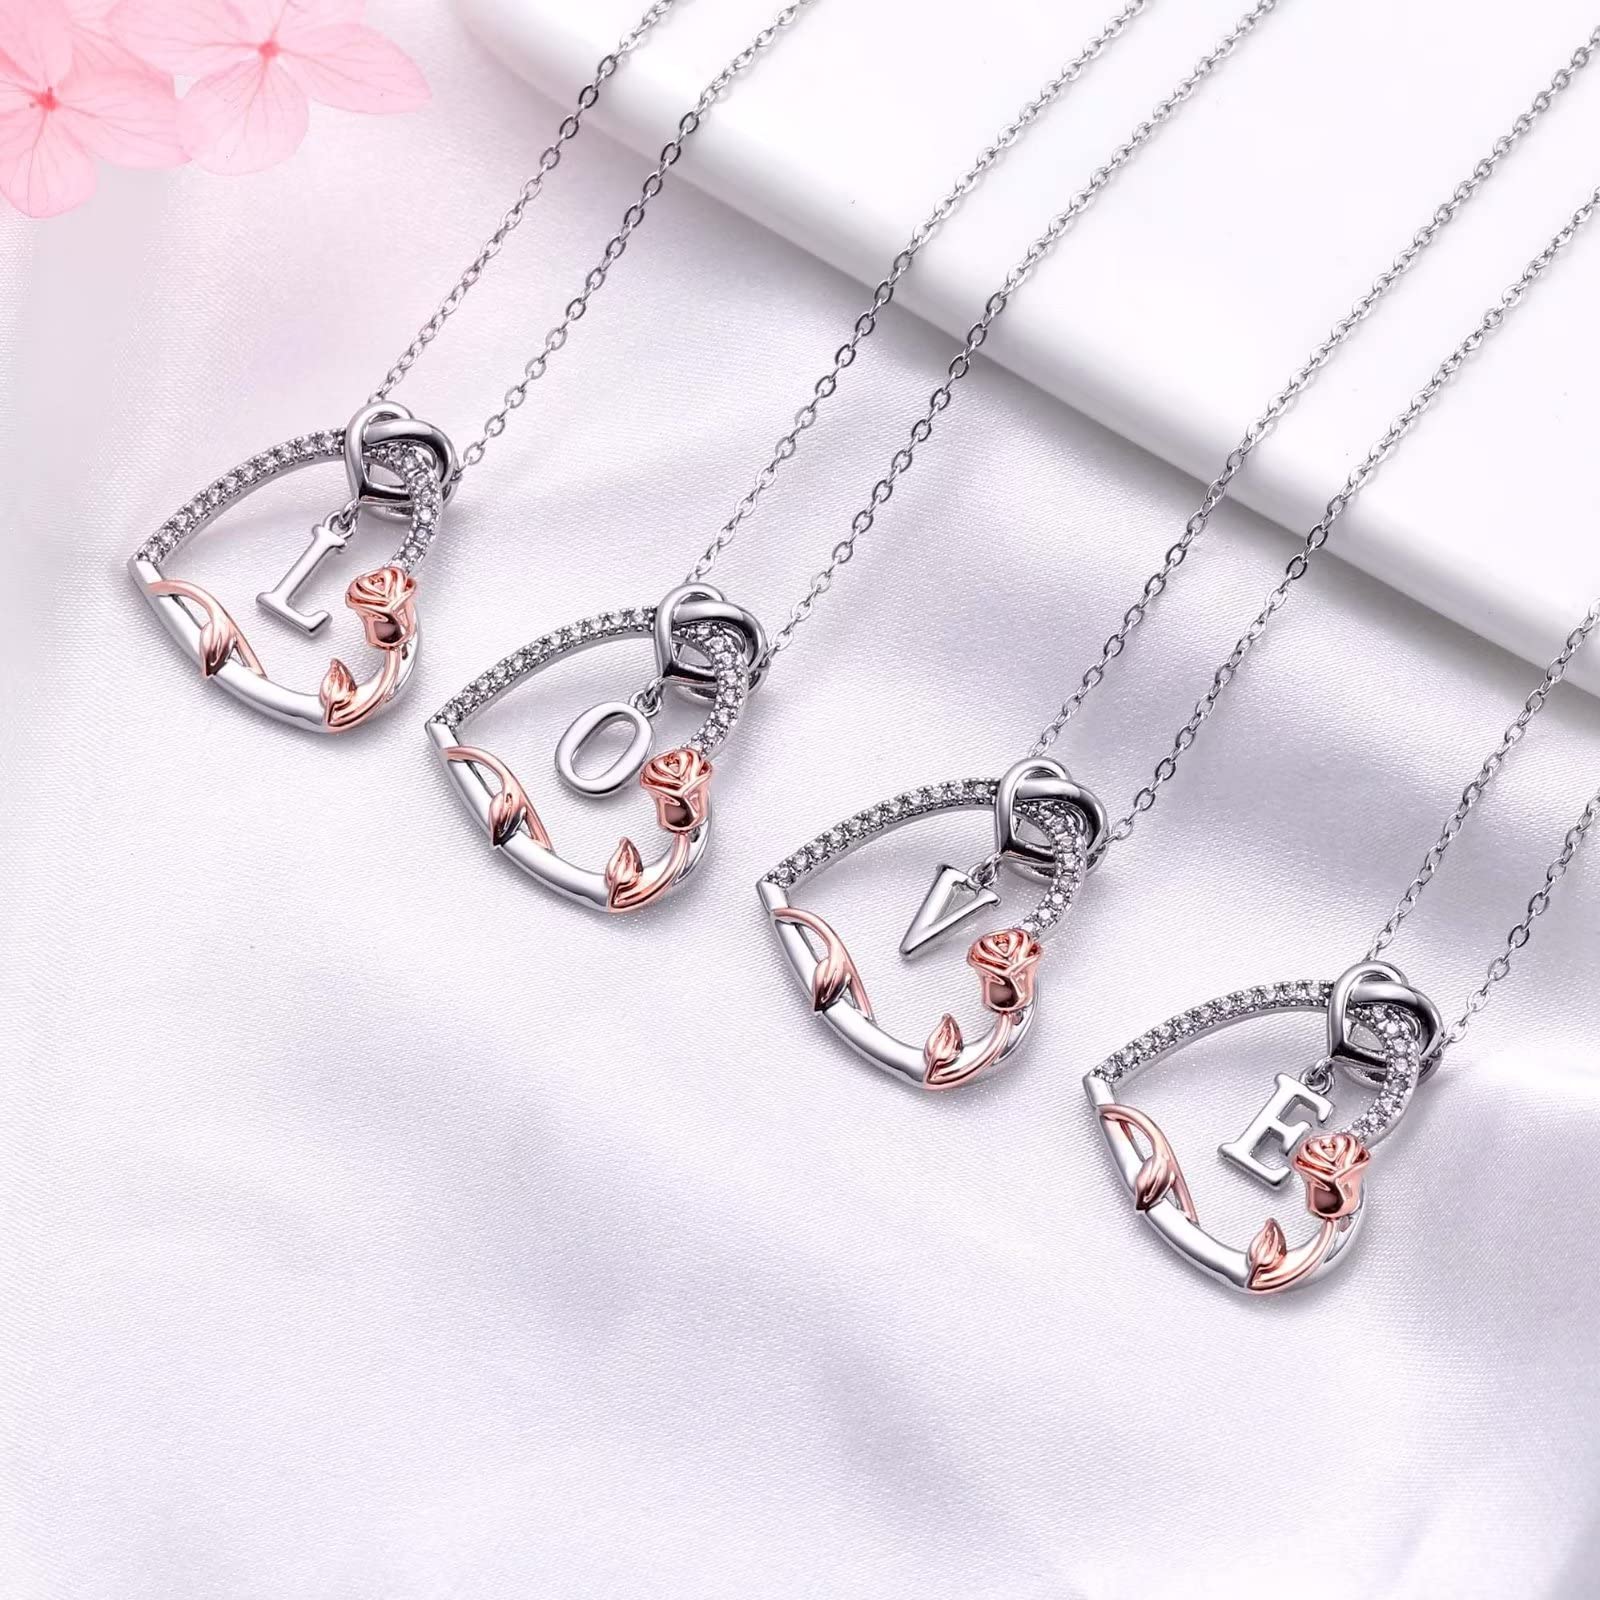 Rose Heart Initial Necklaces Gifts for Women Teen Girls, Love Heart Initial Letter Pendant Necklace Jewelry Mothers Day Valentines Christmas Birthday Gifts for Her Girlfriend Wife Mom Daughter